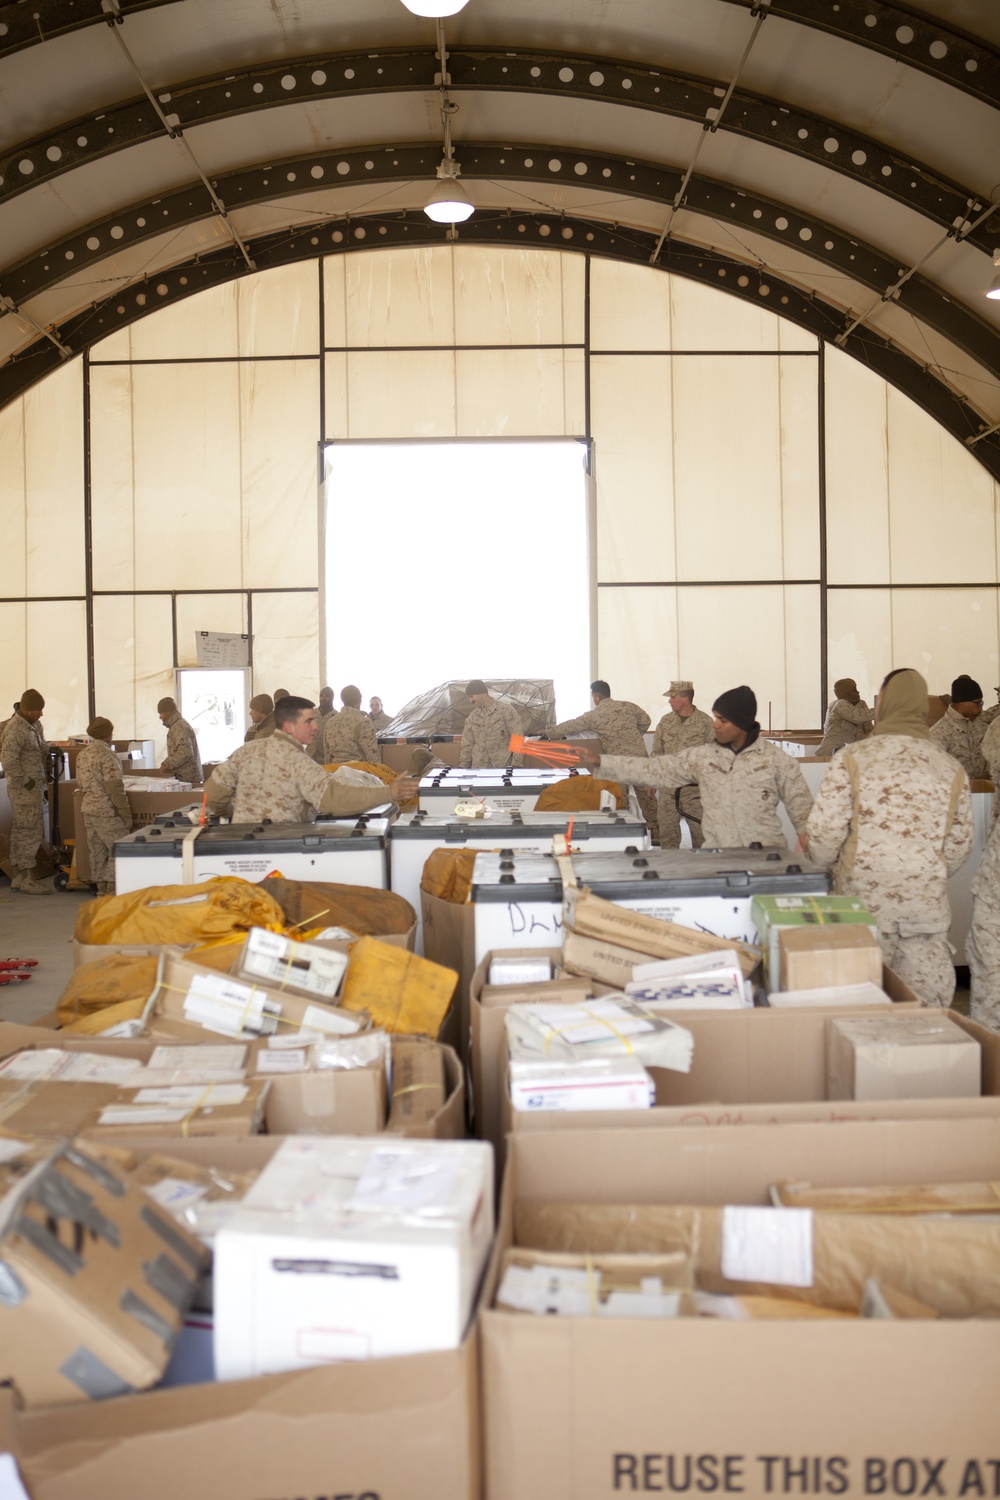 Marines sort holiday mail at Camp Leatherneck, Afghanistan